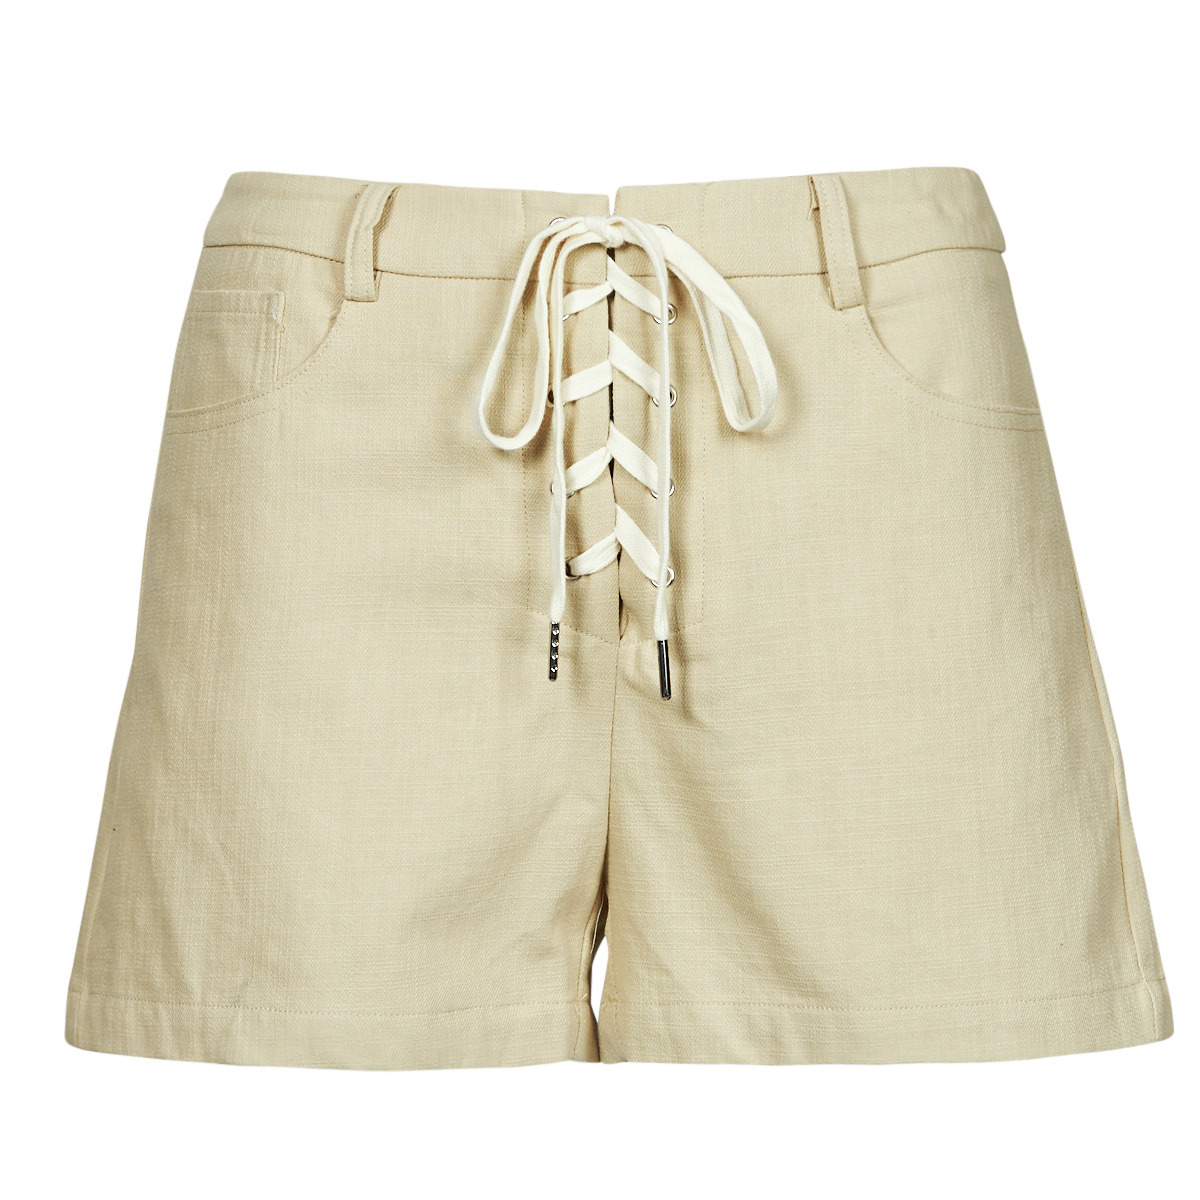 Shorts Beige for Women at Spartoo GOOFASH